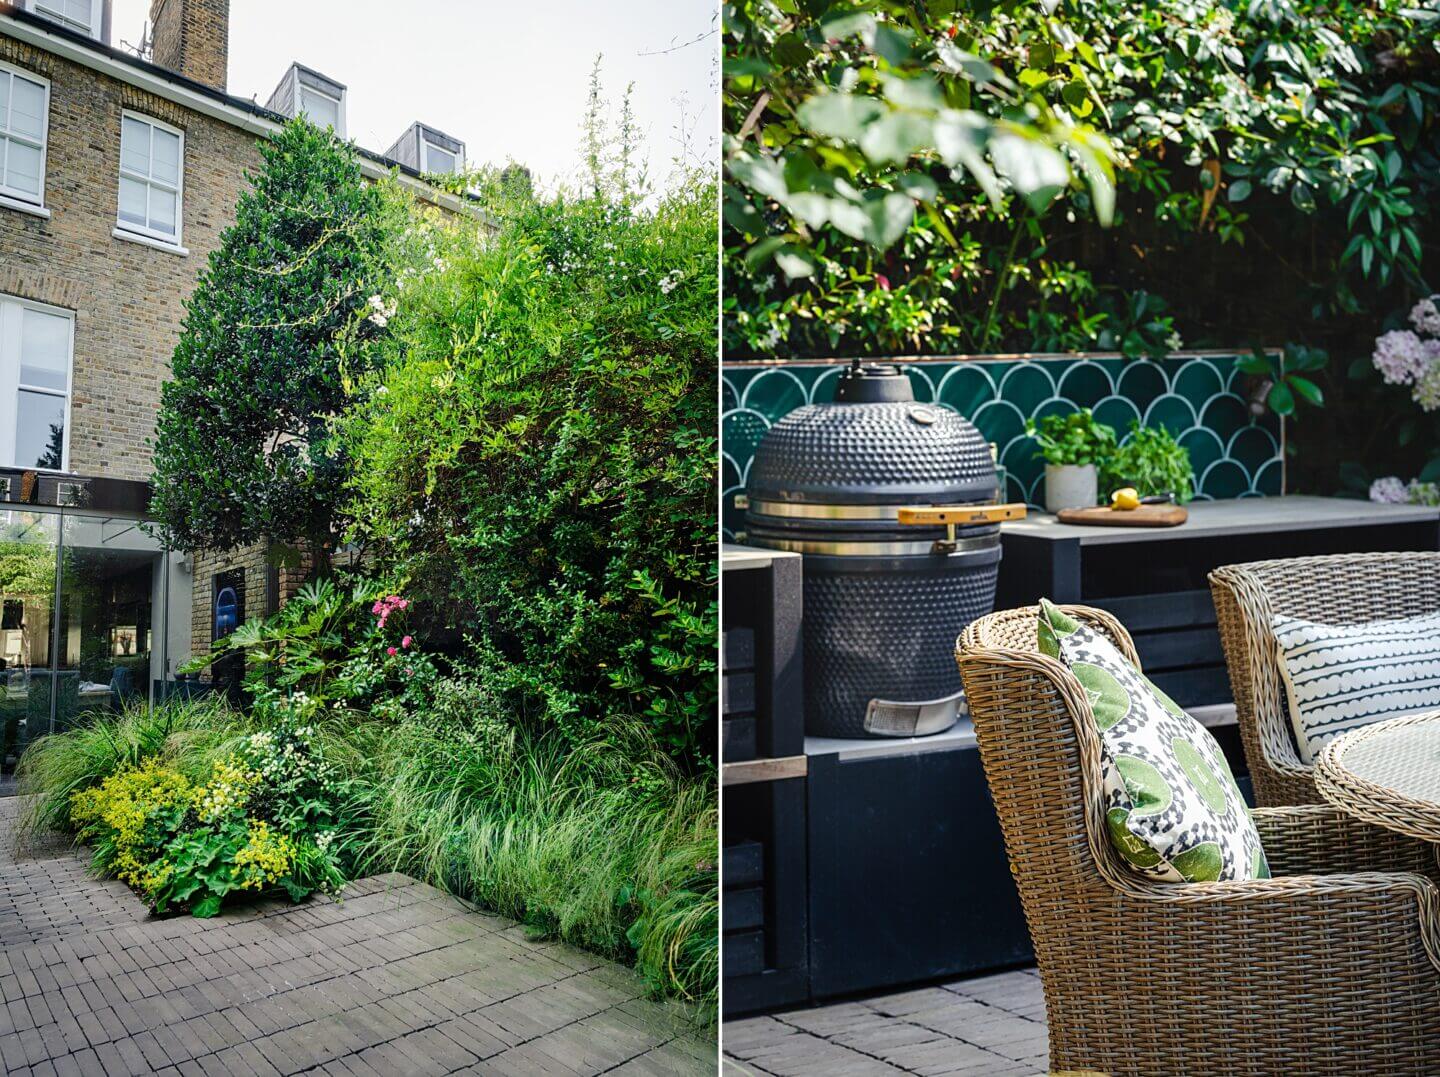 Example of a compact urban courtyard garden with mature planting, seating area and outdoor kitchen